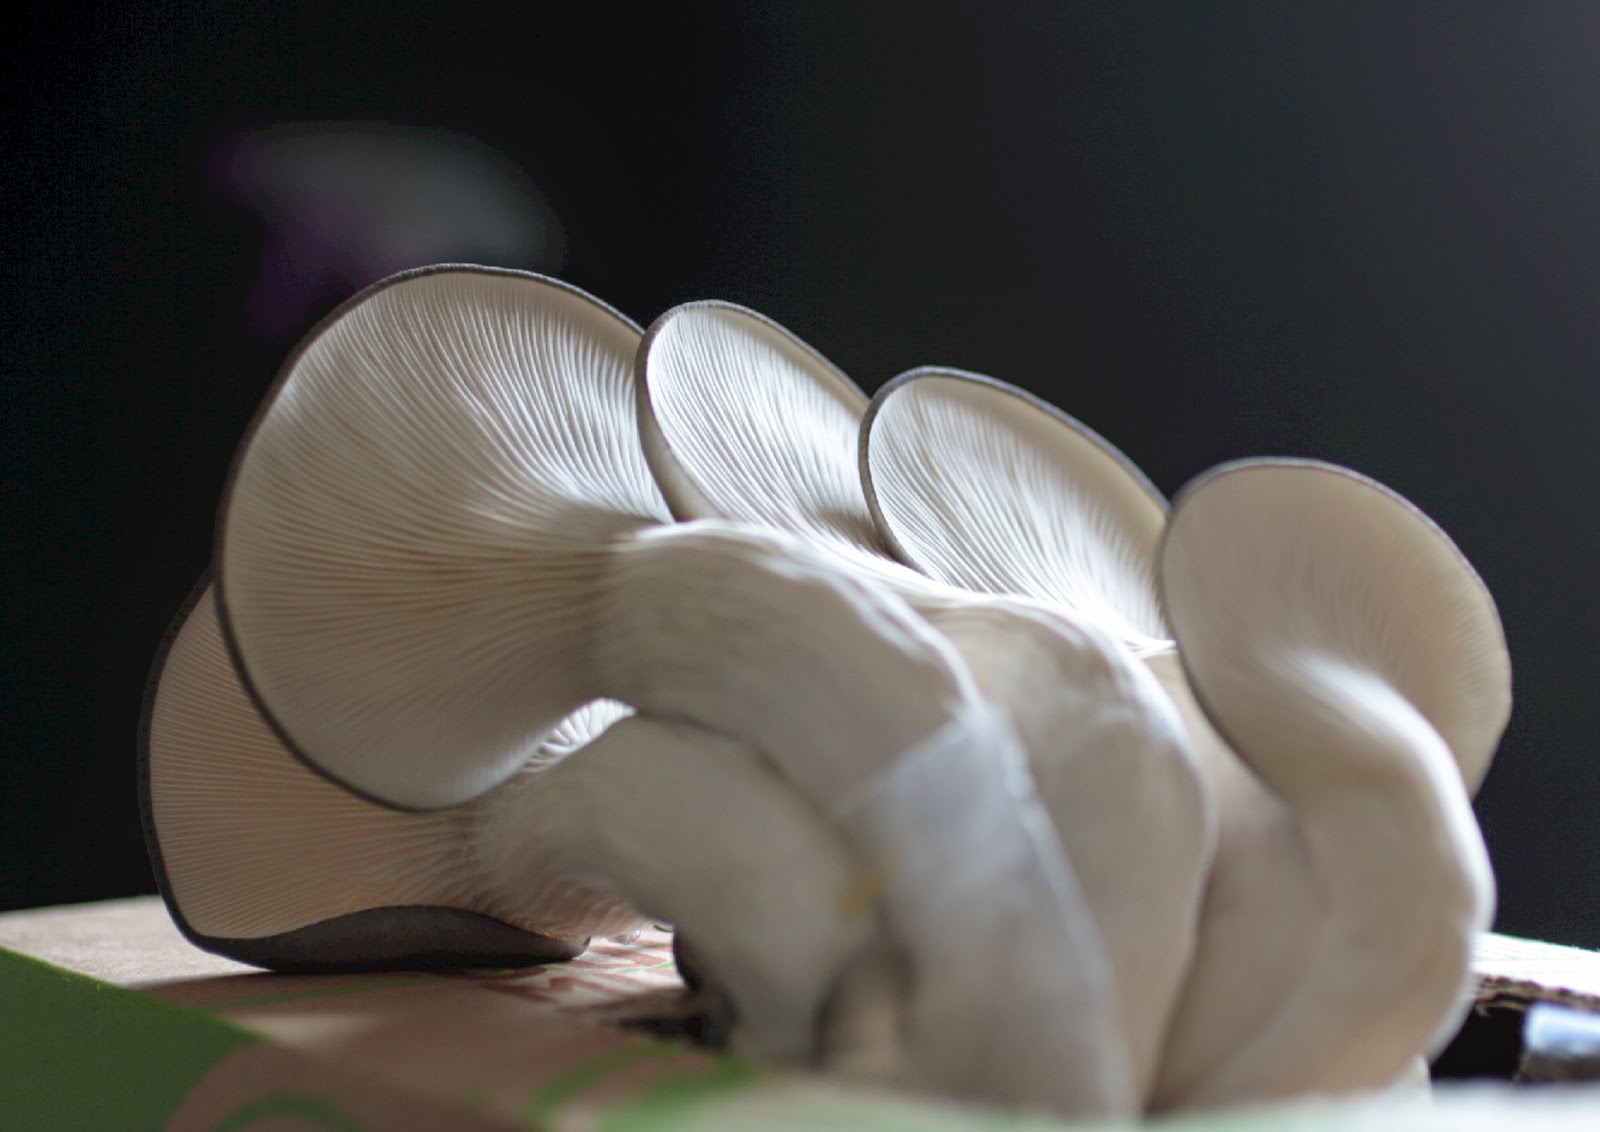 GroCycle use waste coffee grounds to grow delicious gourmet oyster mushrooms and now with one of their kits you can enjoy fresh mushrooms in your own kitchen